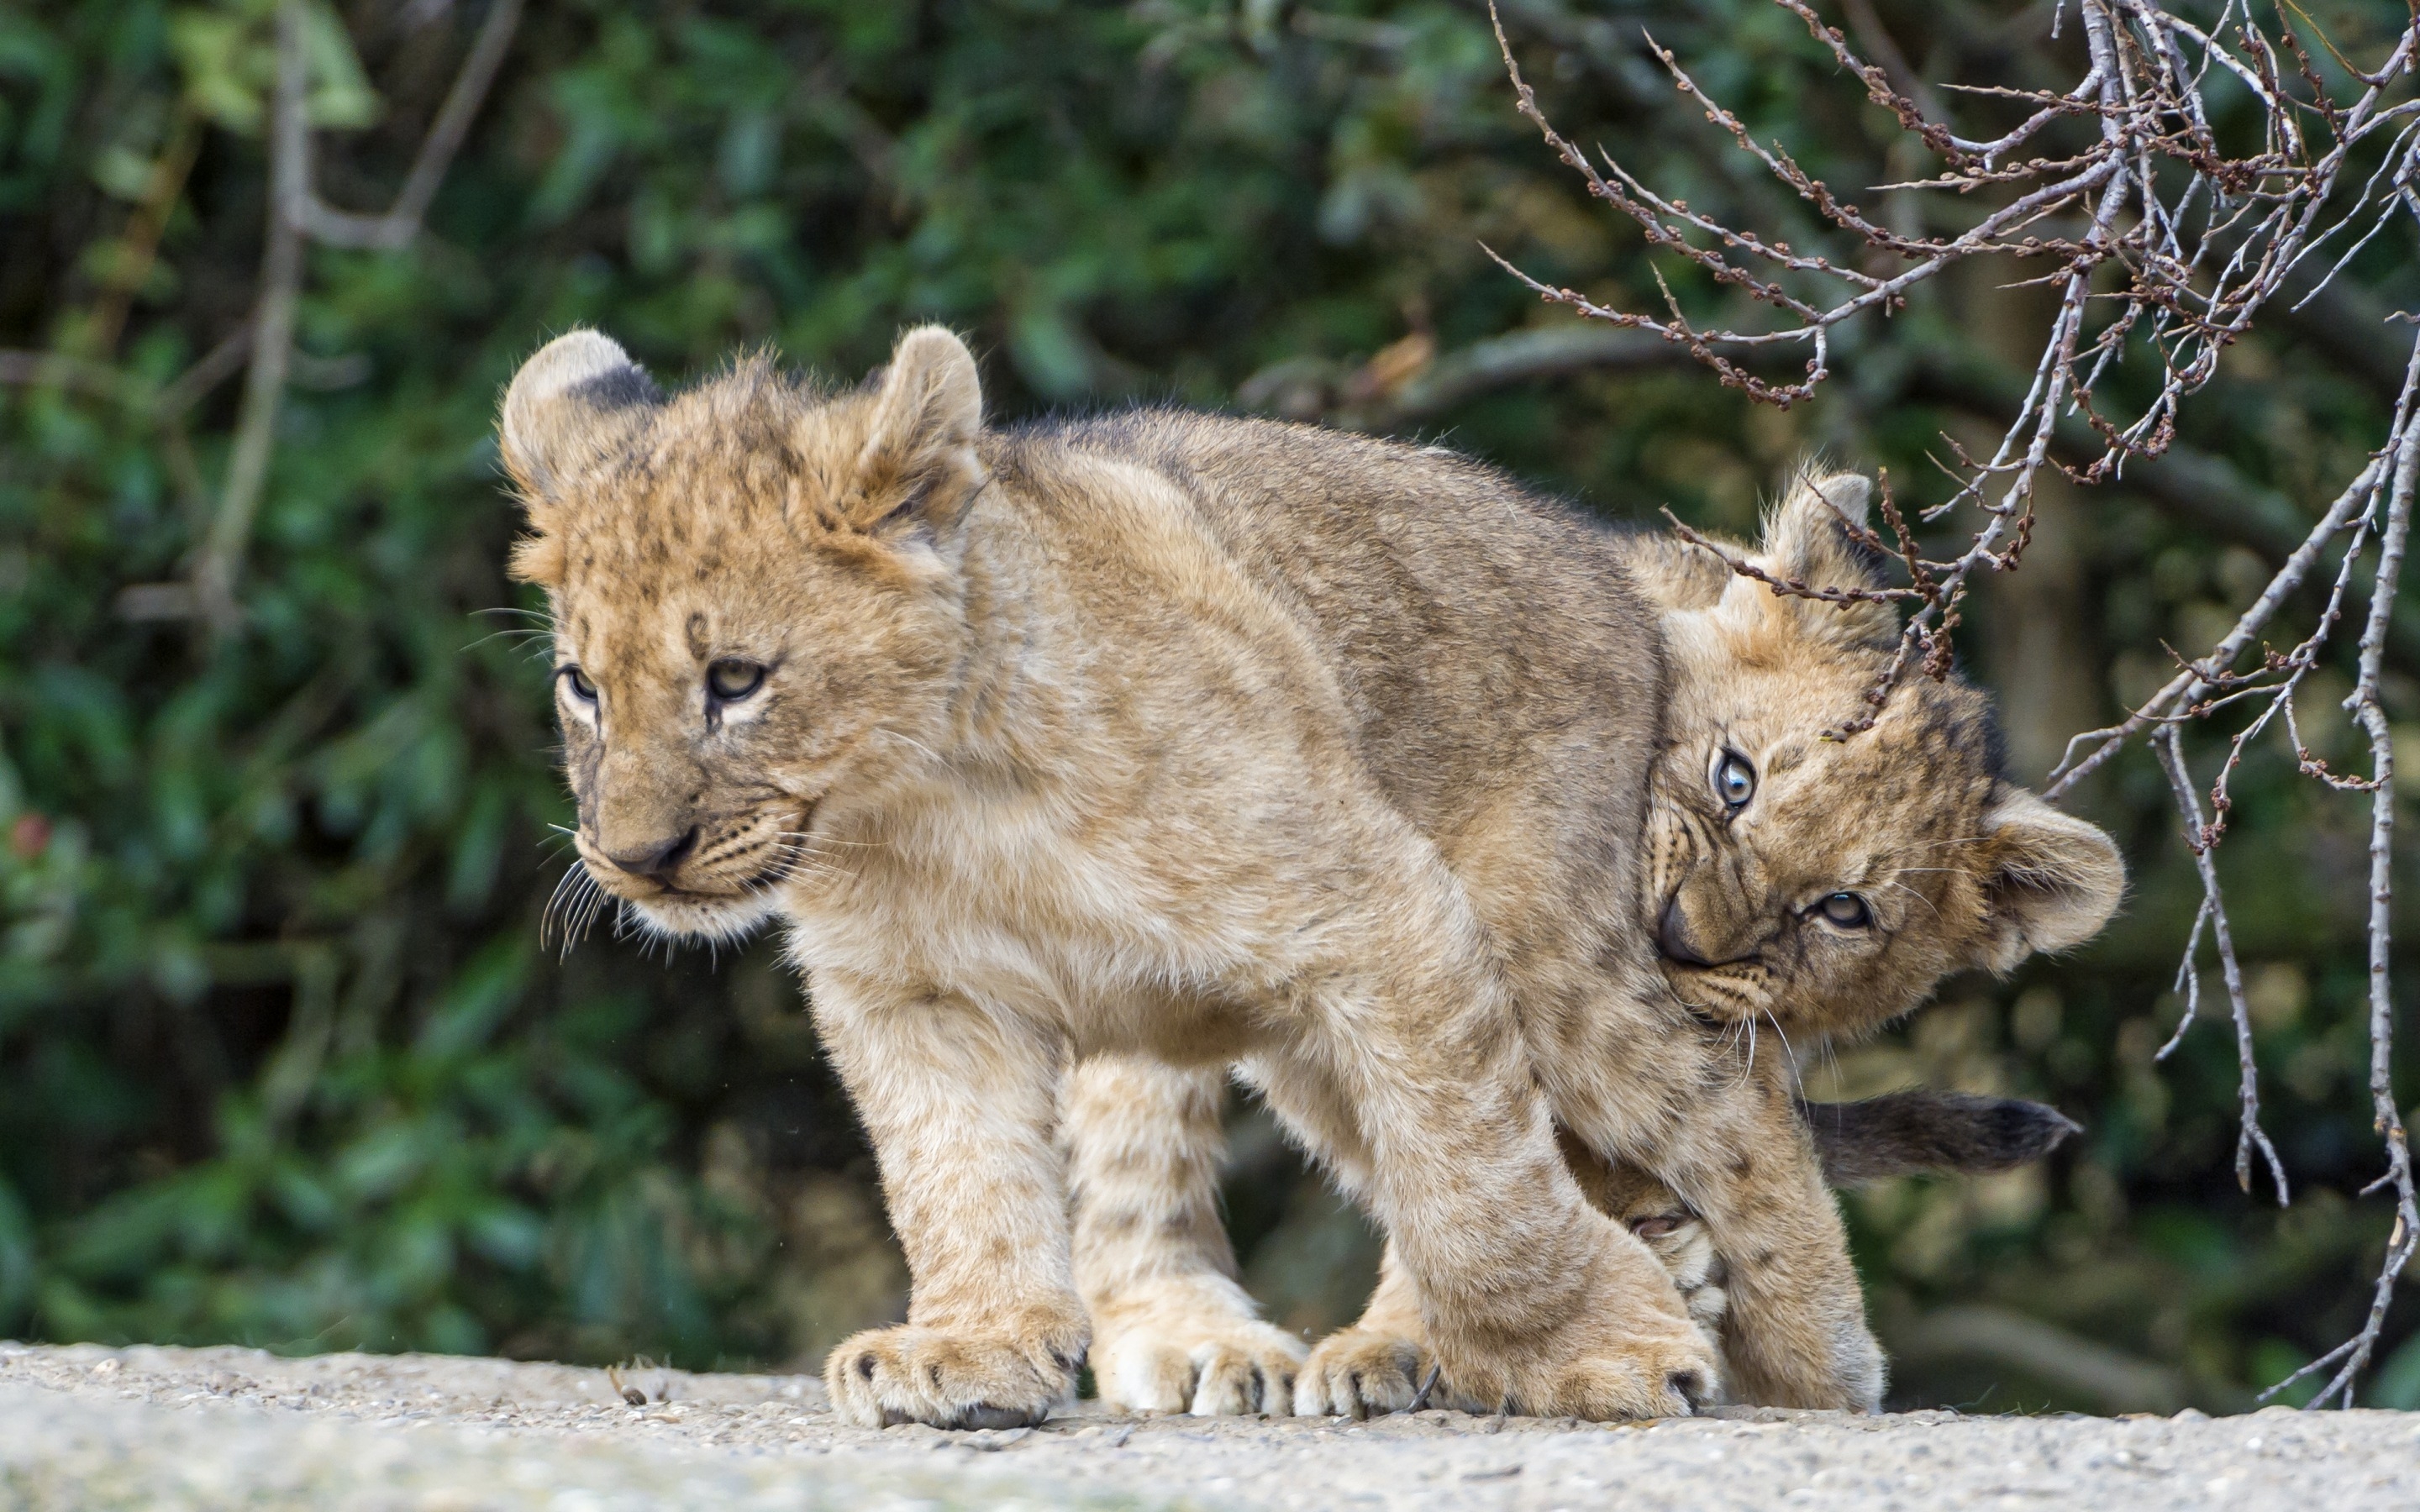 Lion Cubs Playing for 2880 x 1800 Retina Display resolution